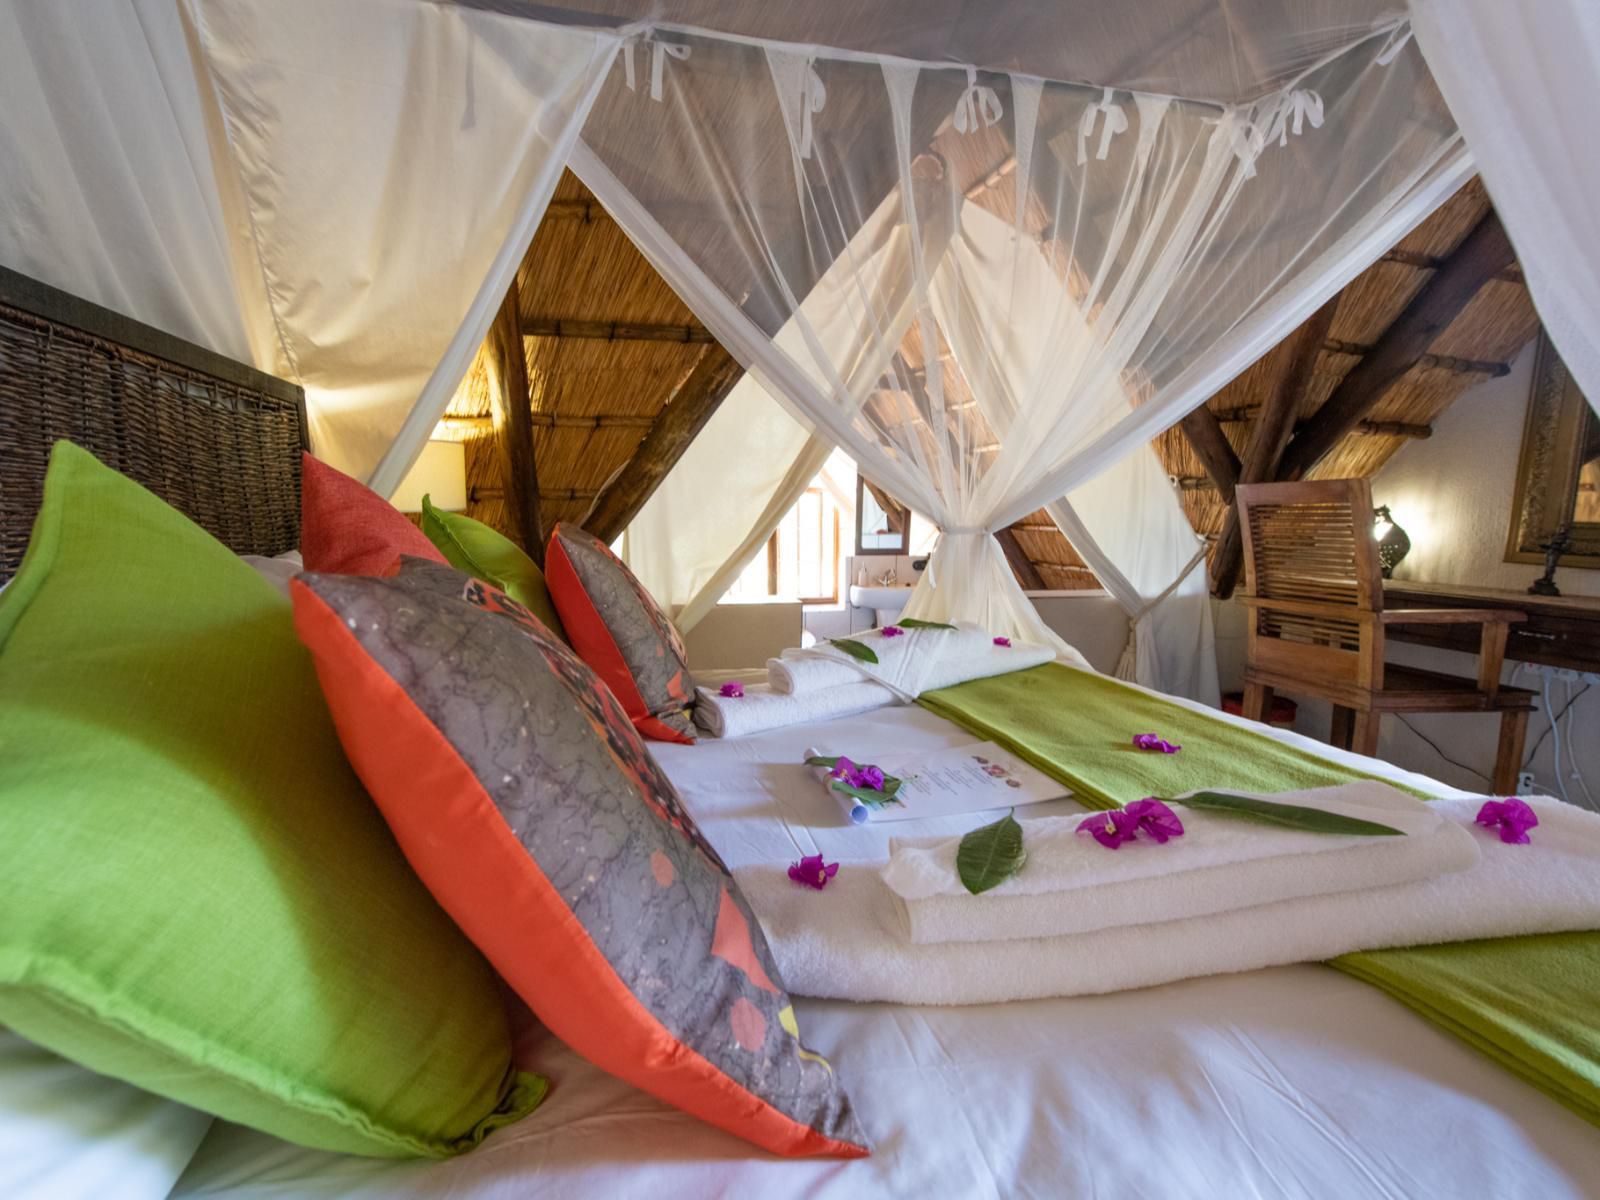 Blyde River Canyon Lodge Hoedspruit Limpopo Province South Africa Tent, Architecture, Bedroom